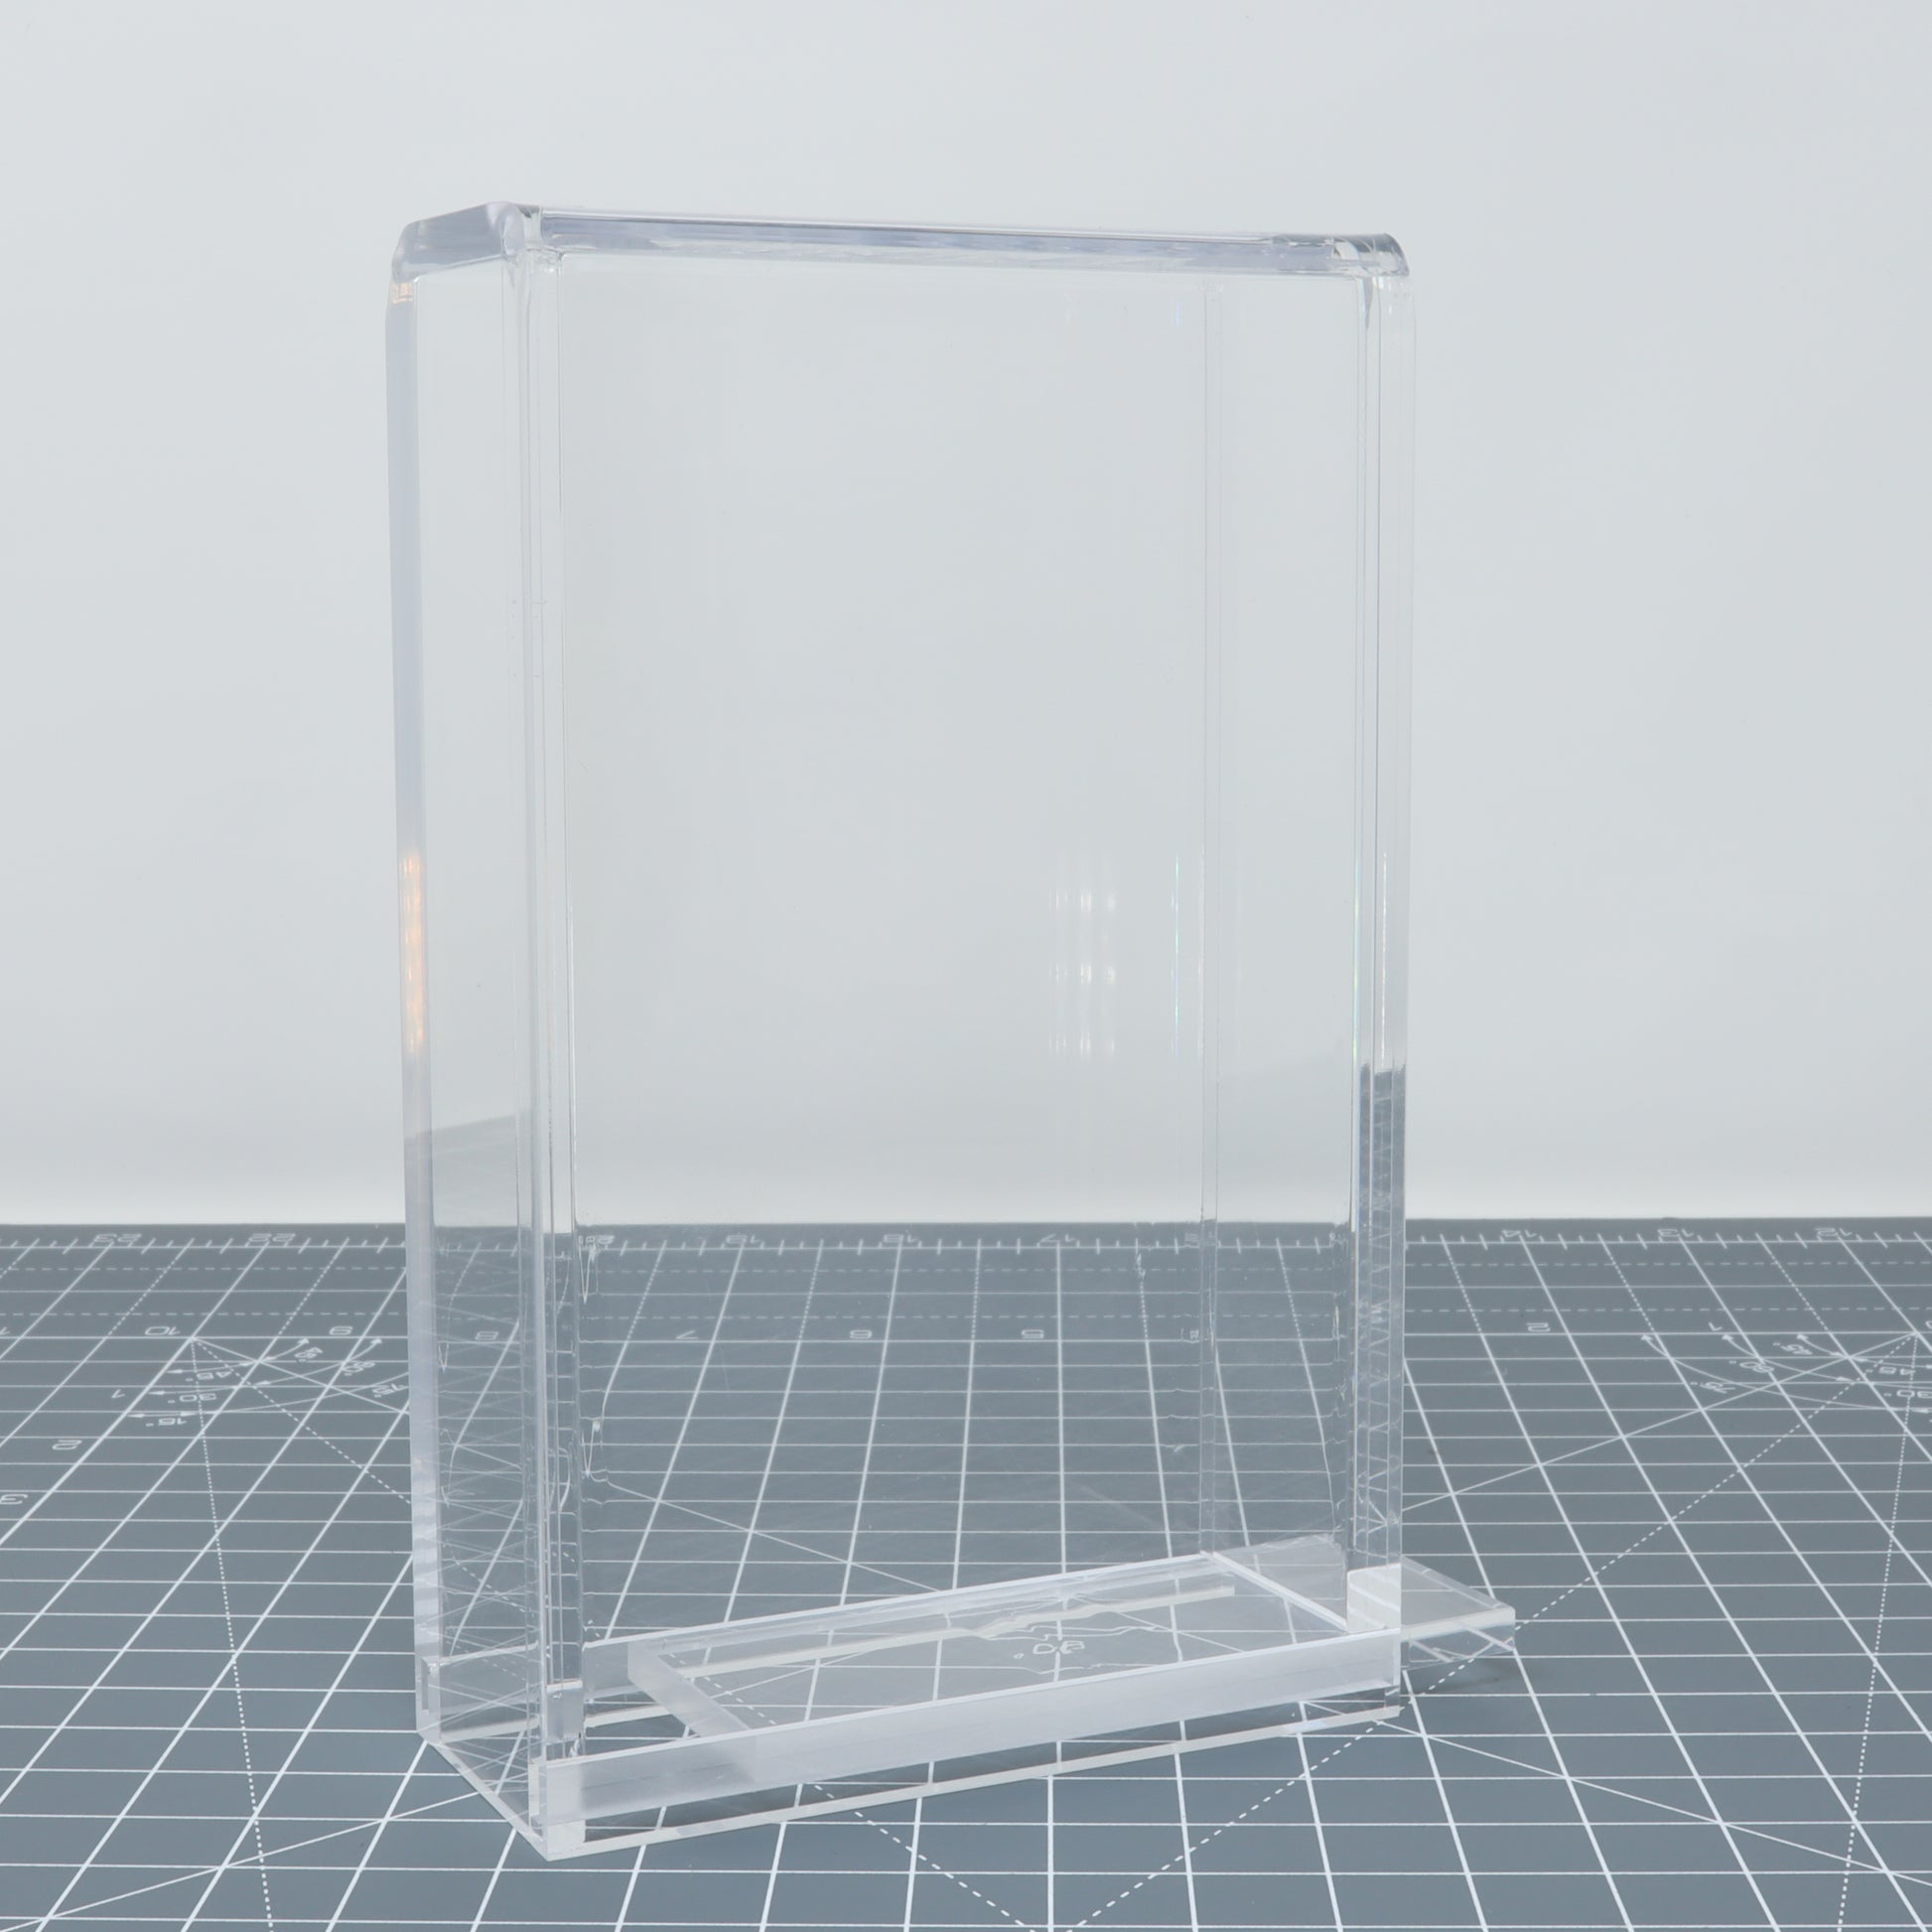 A clear acrylic display case, perfect for Game Boy Color - Display Capsule accessories, on a background.